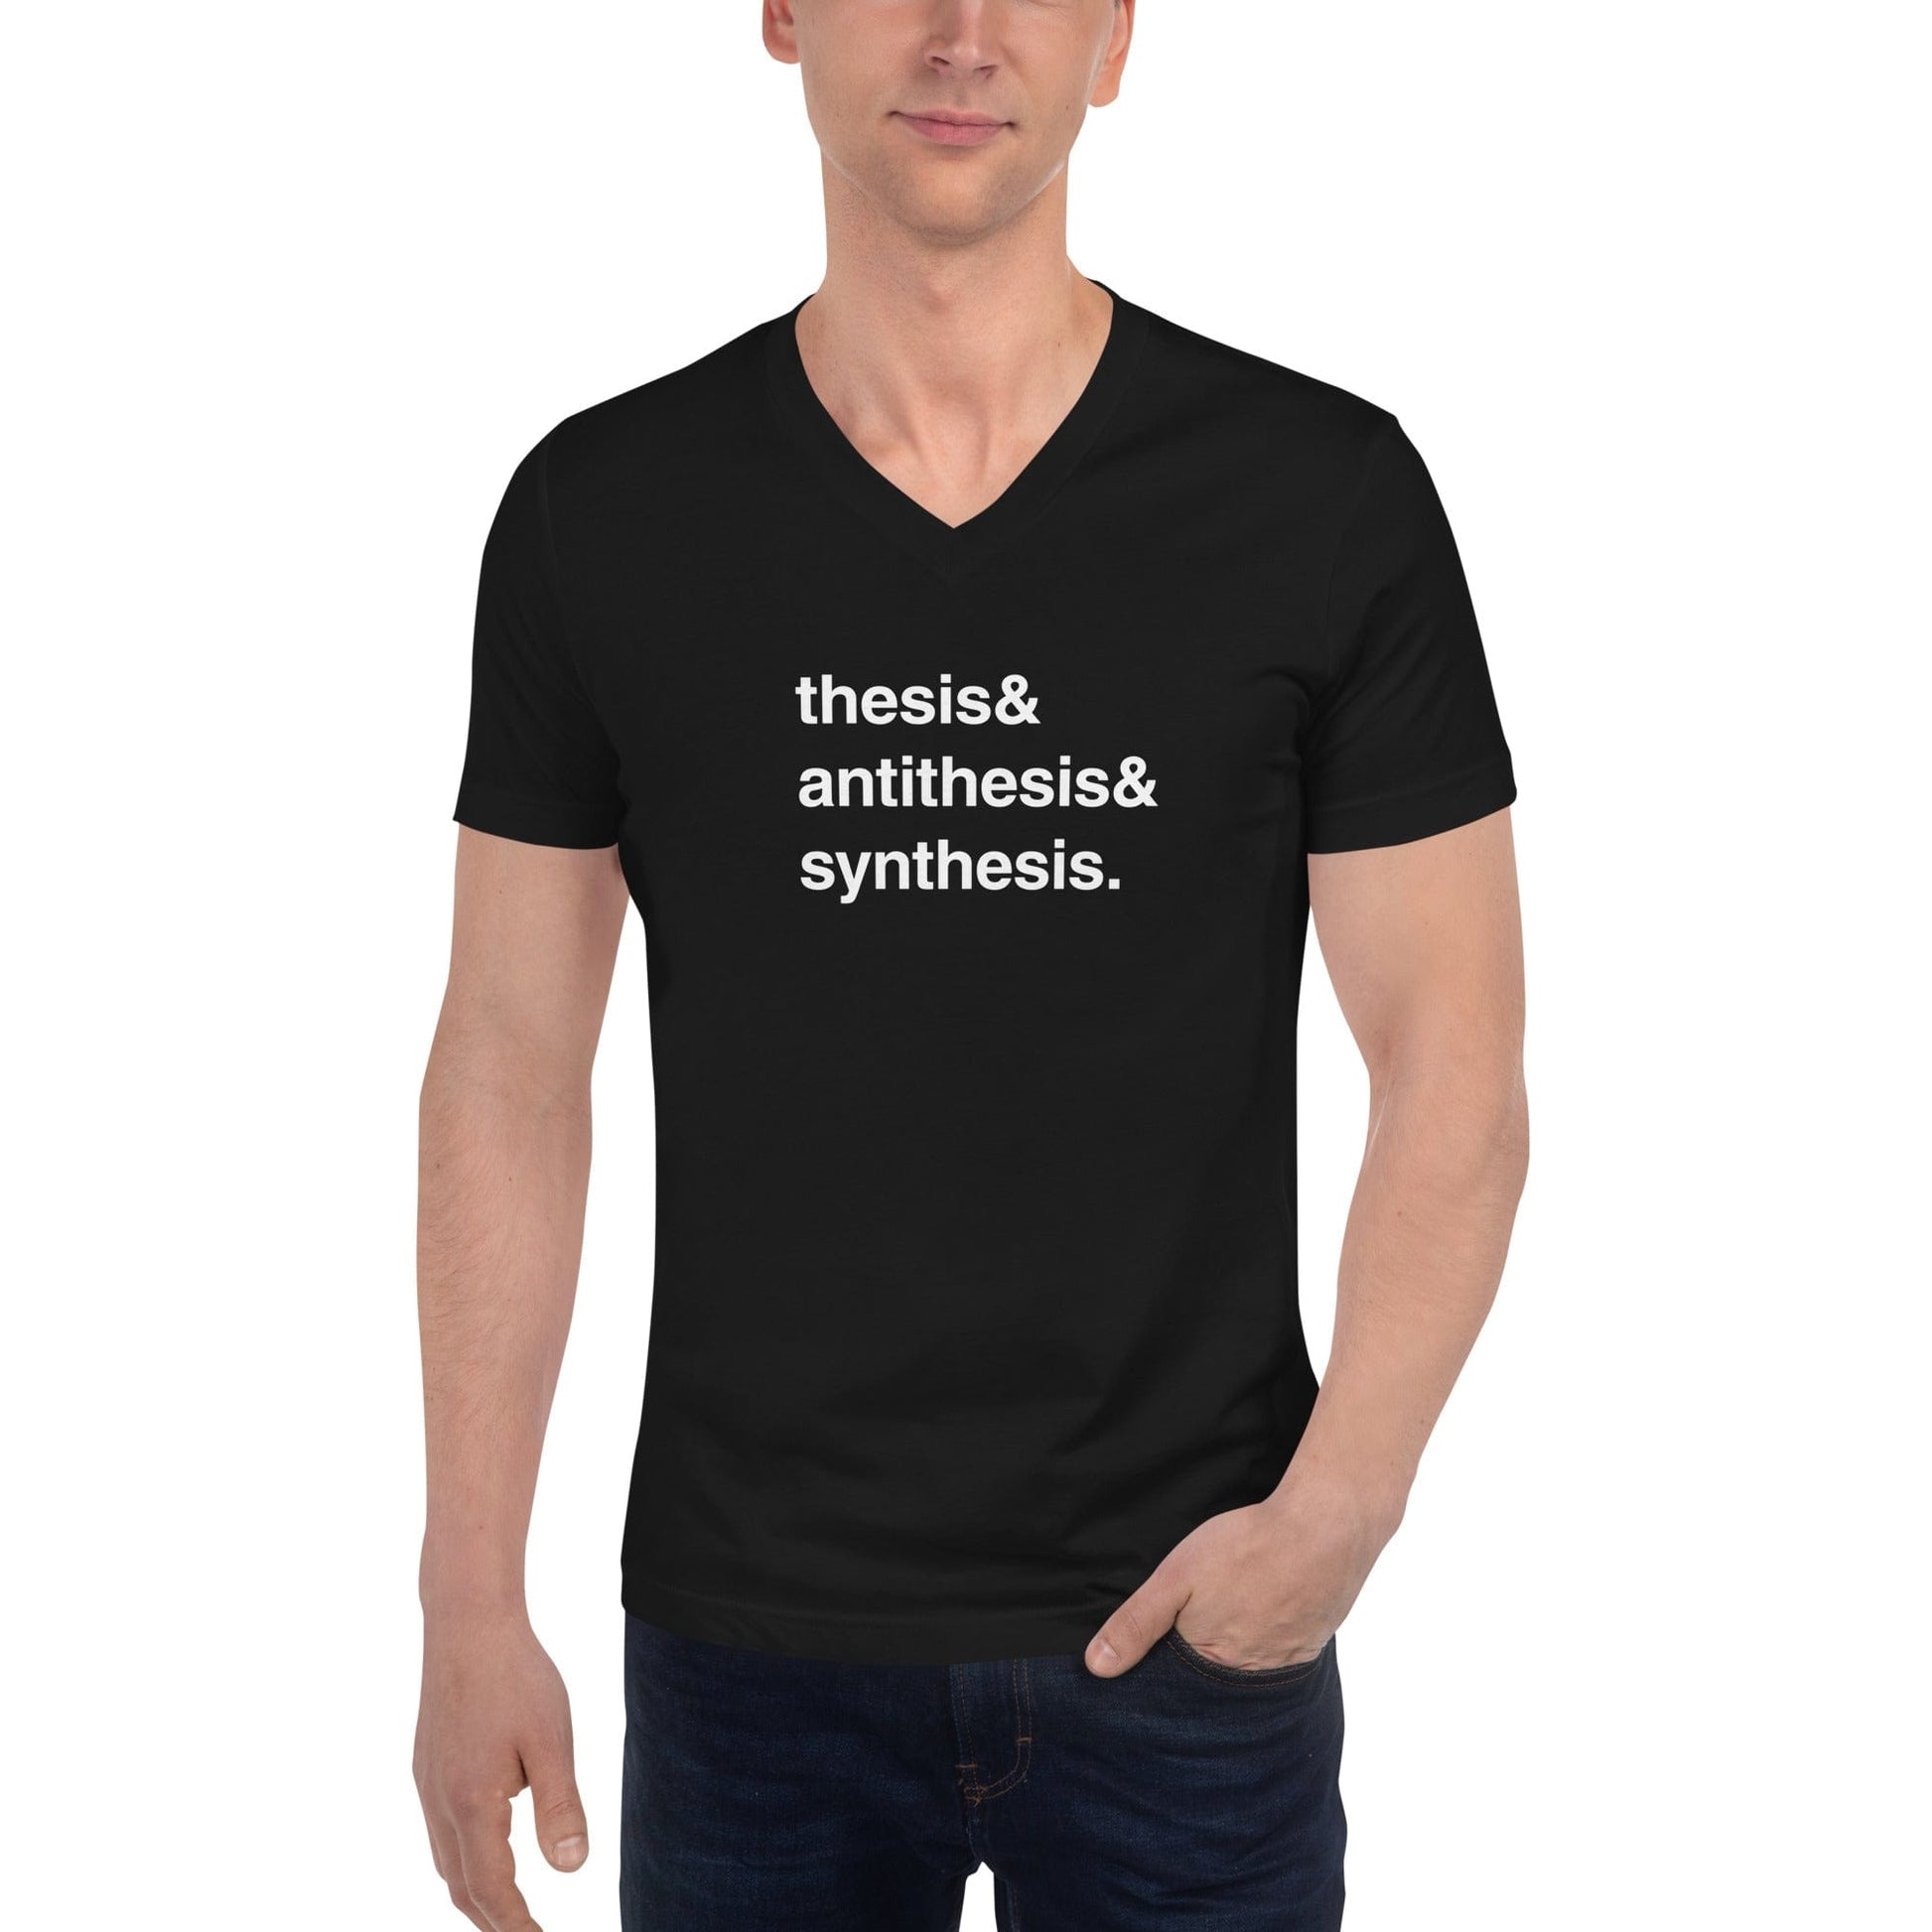 Thesis & Antithesis & Synthesis - Unisex V-Neck T-Shirt